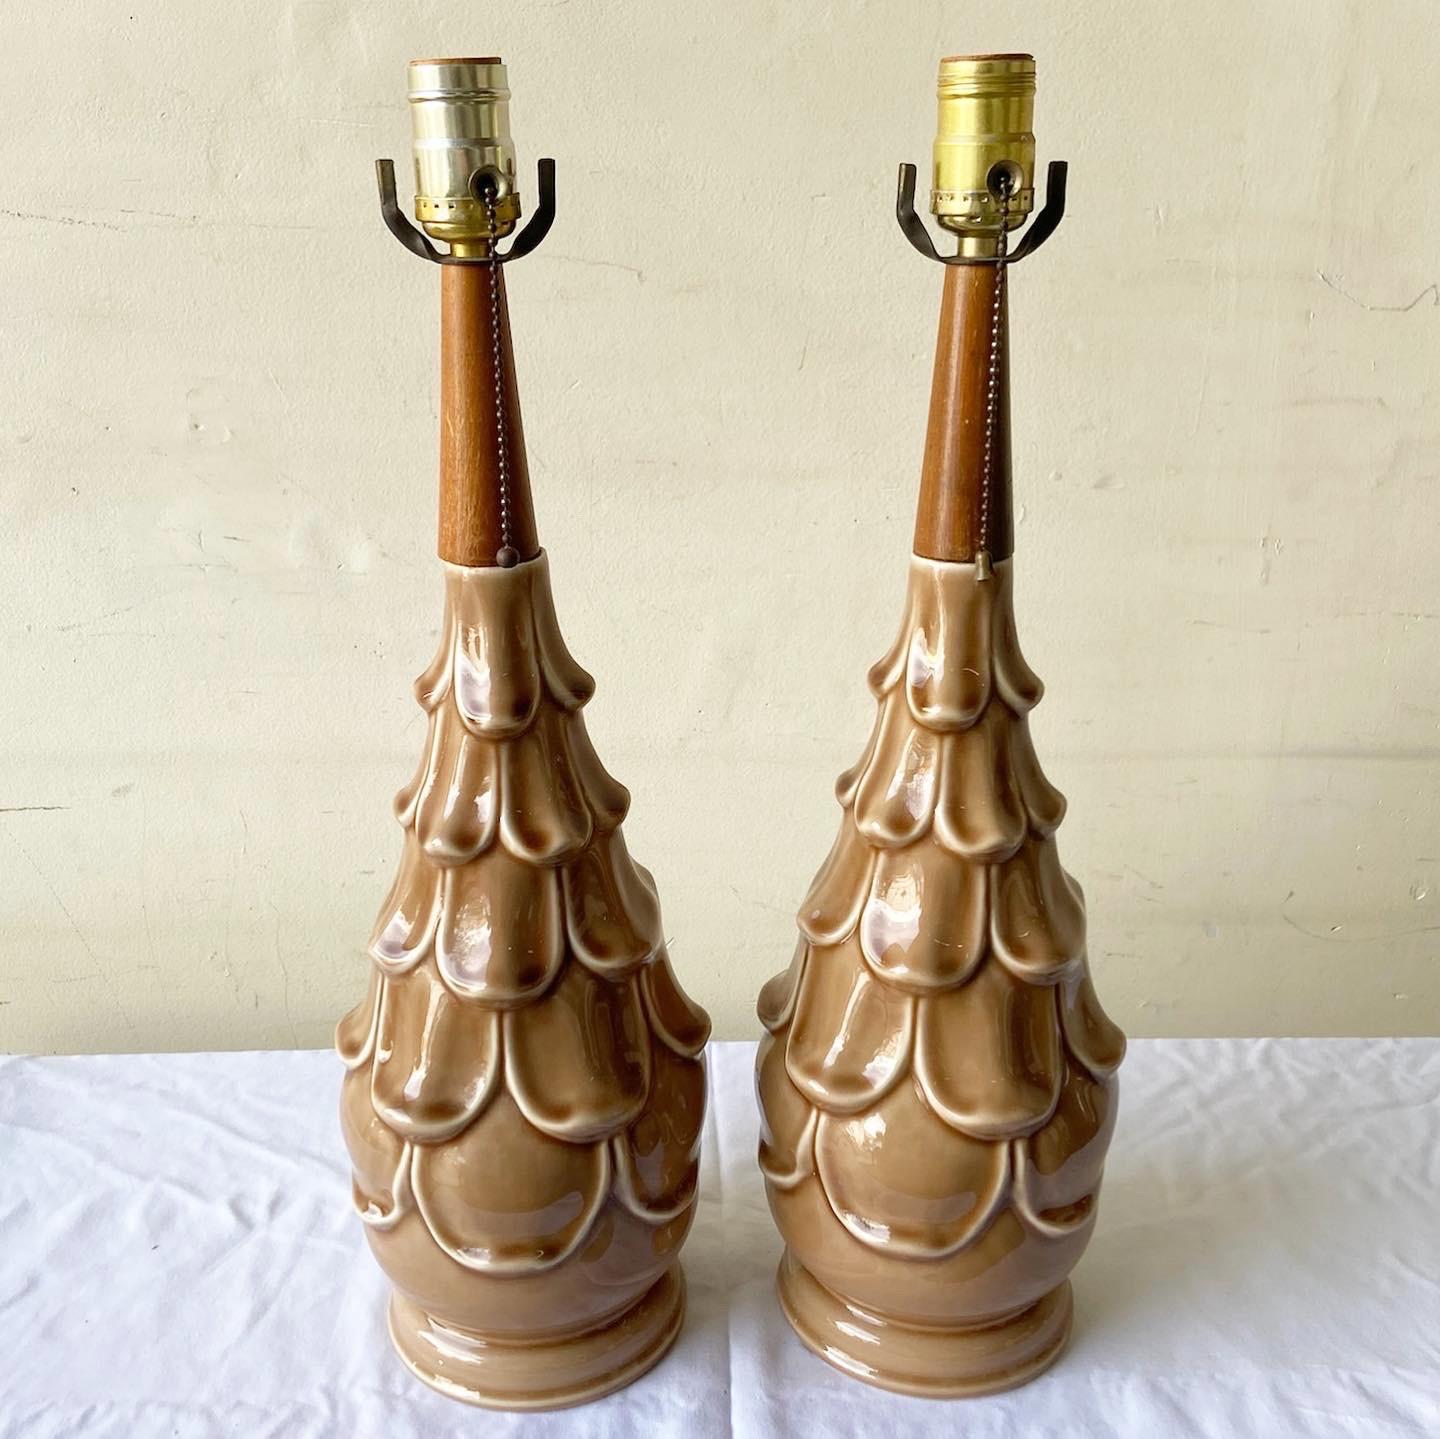 American Mid Century Modern Brown Ceramic Table Lamps - a Pair